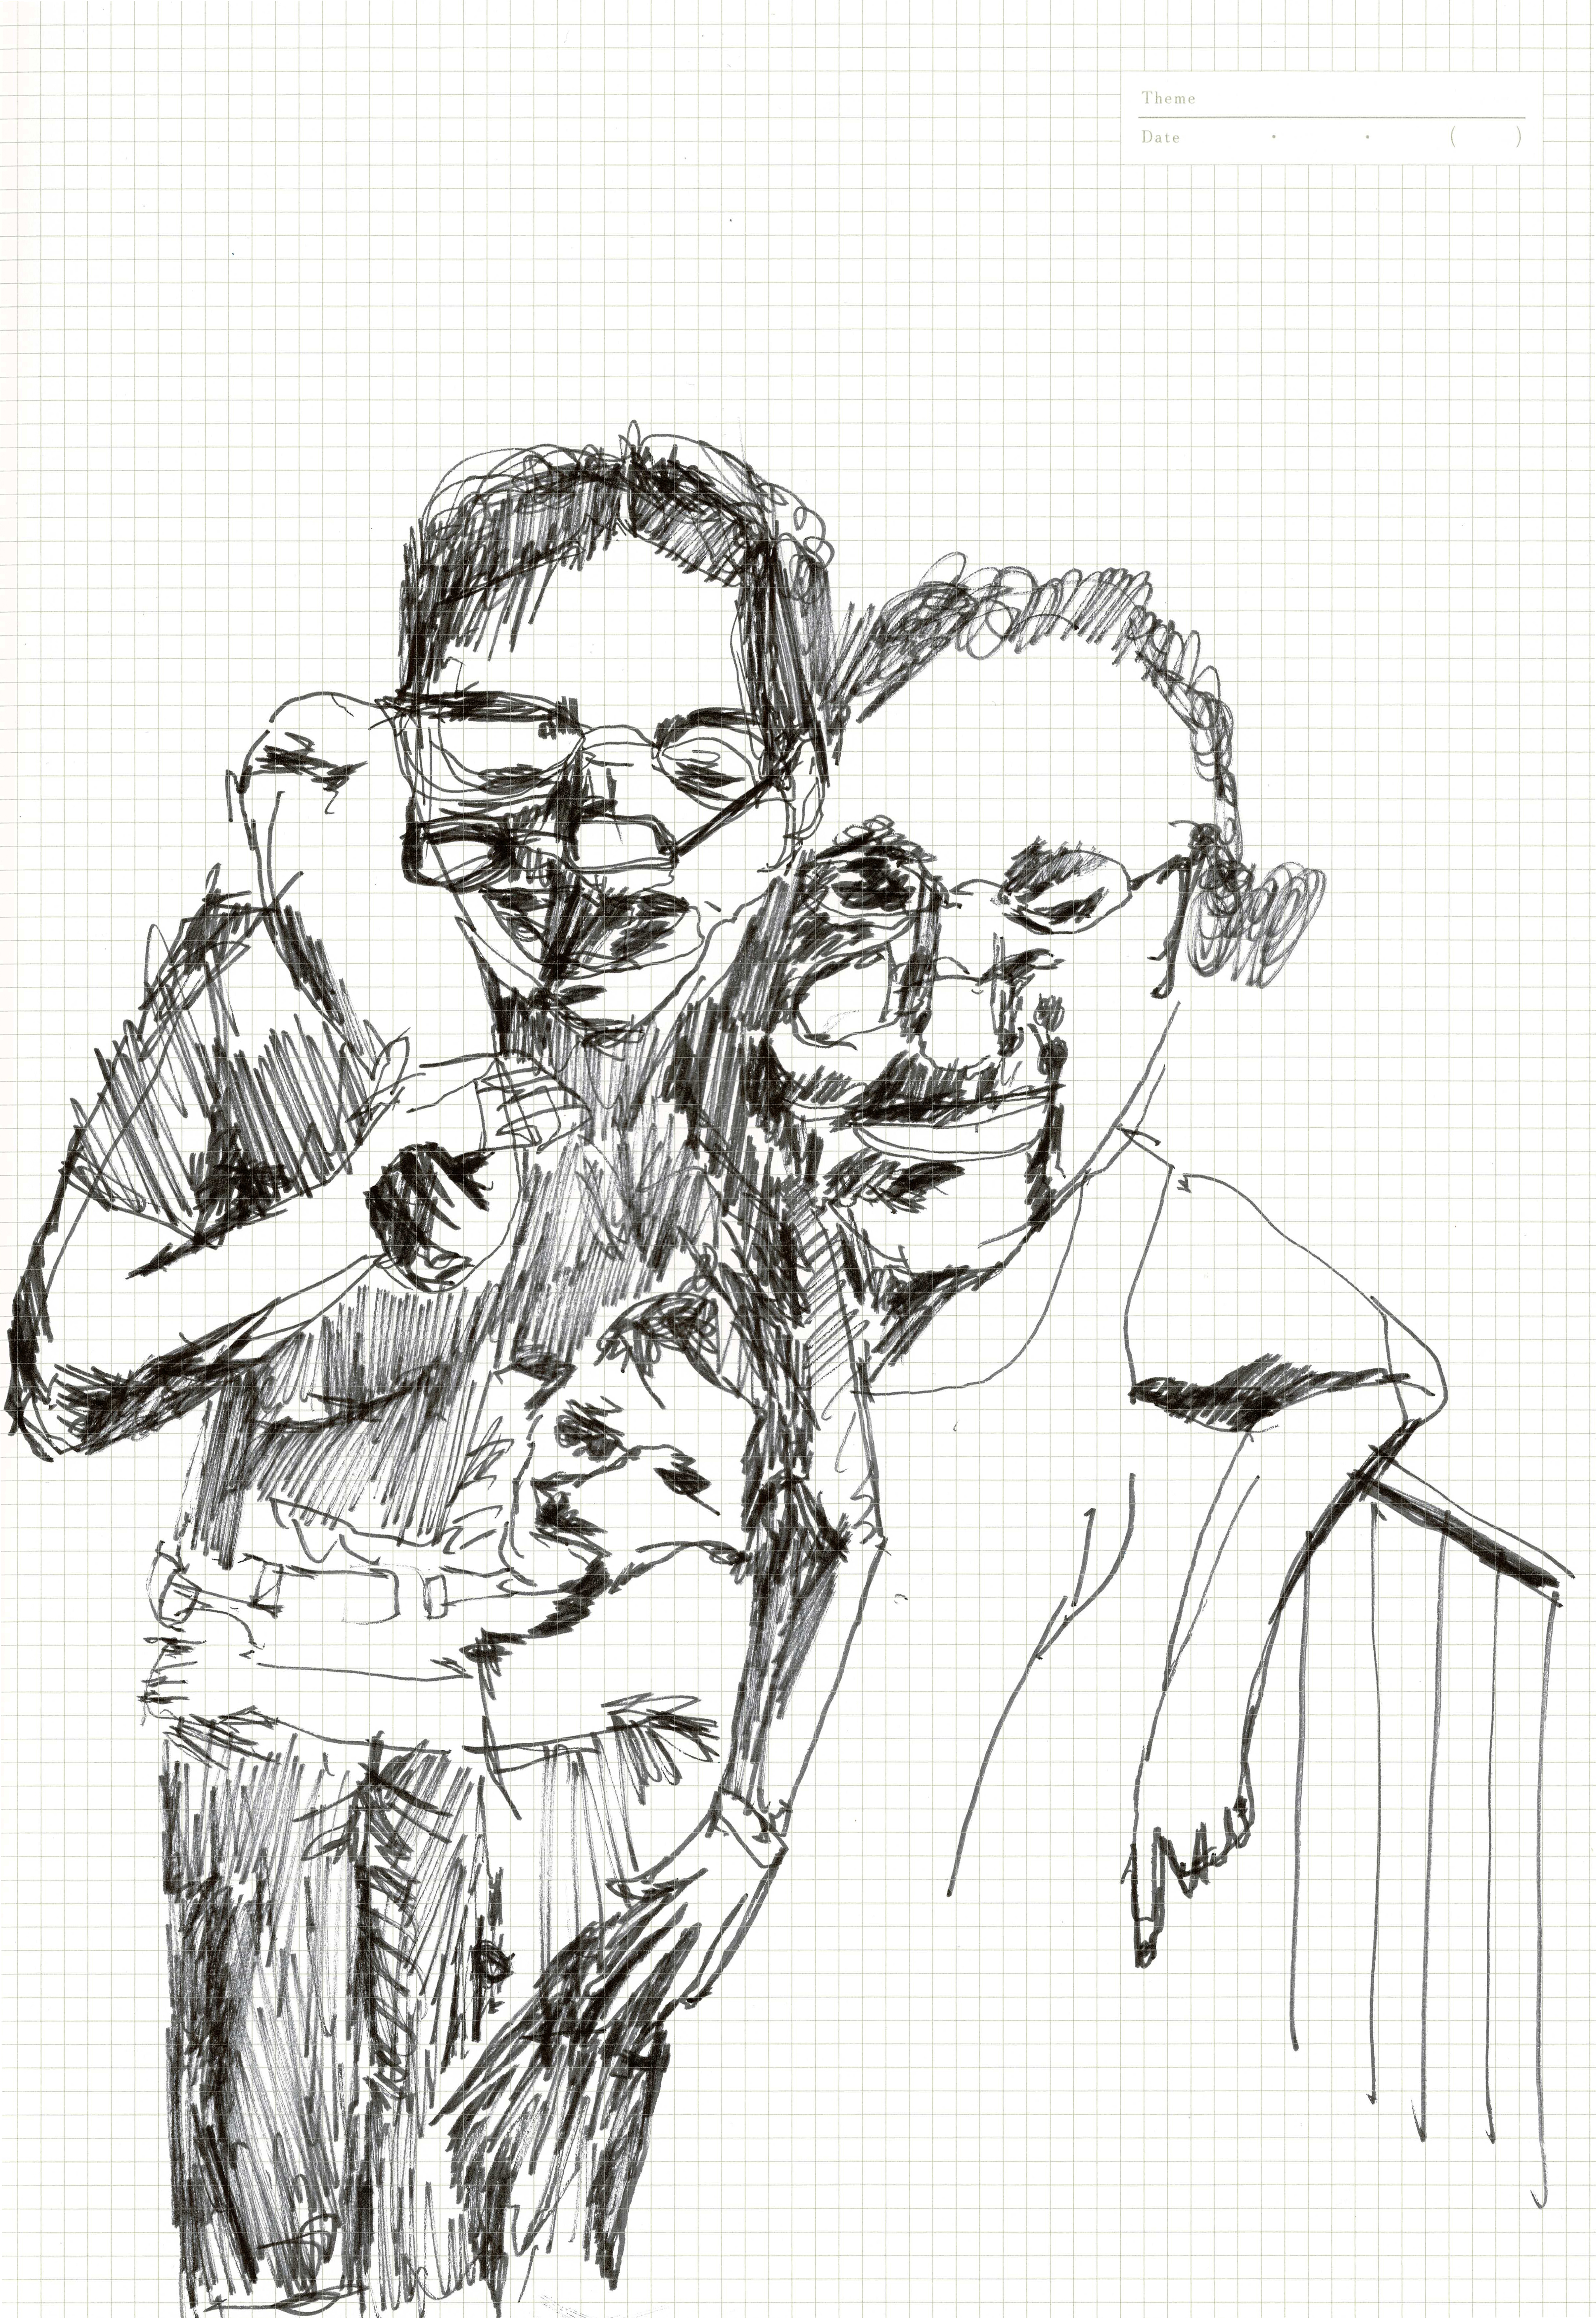 pen drawing of three figures, with arms slung over the other's shoulder, and a small child holding the leg of one figure